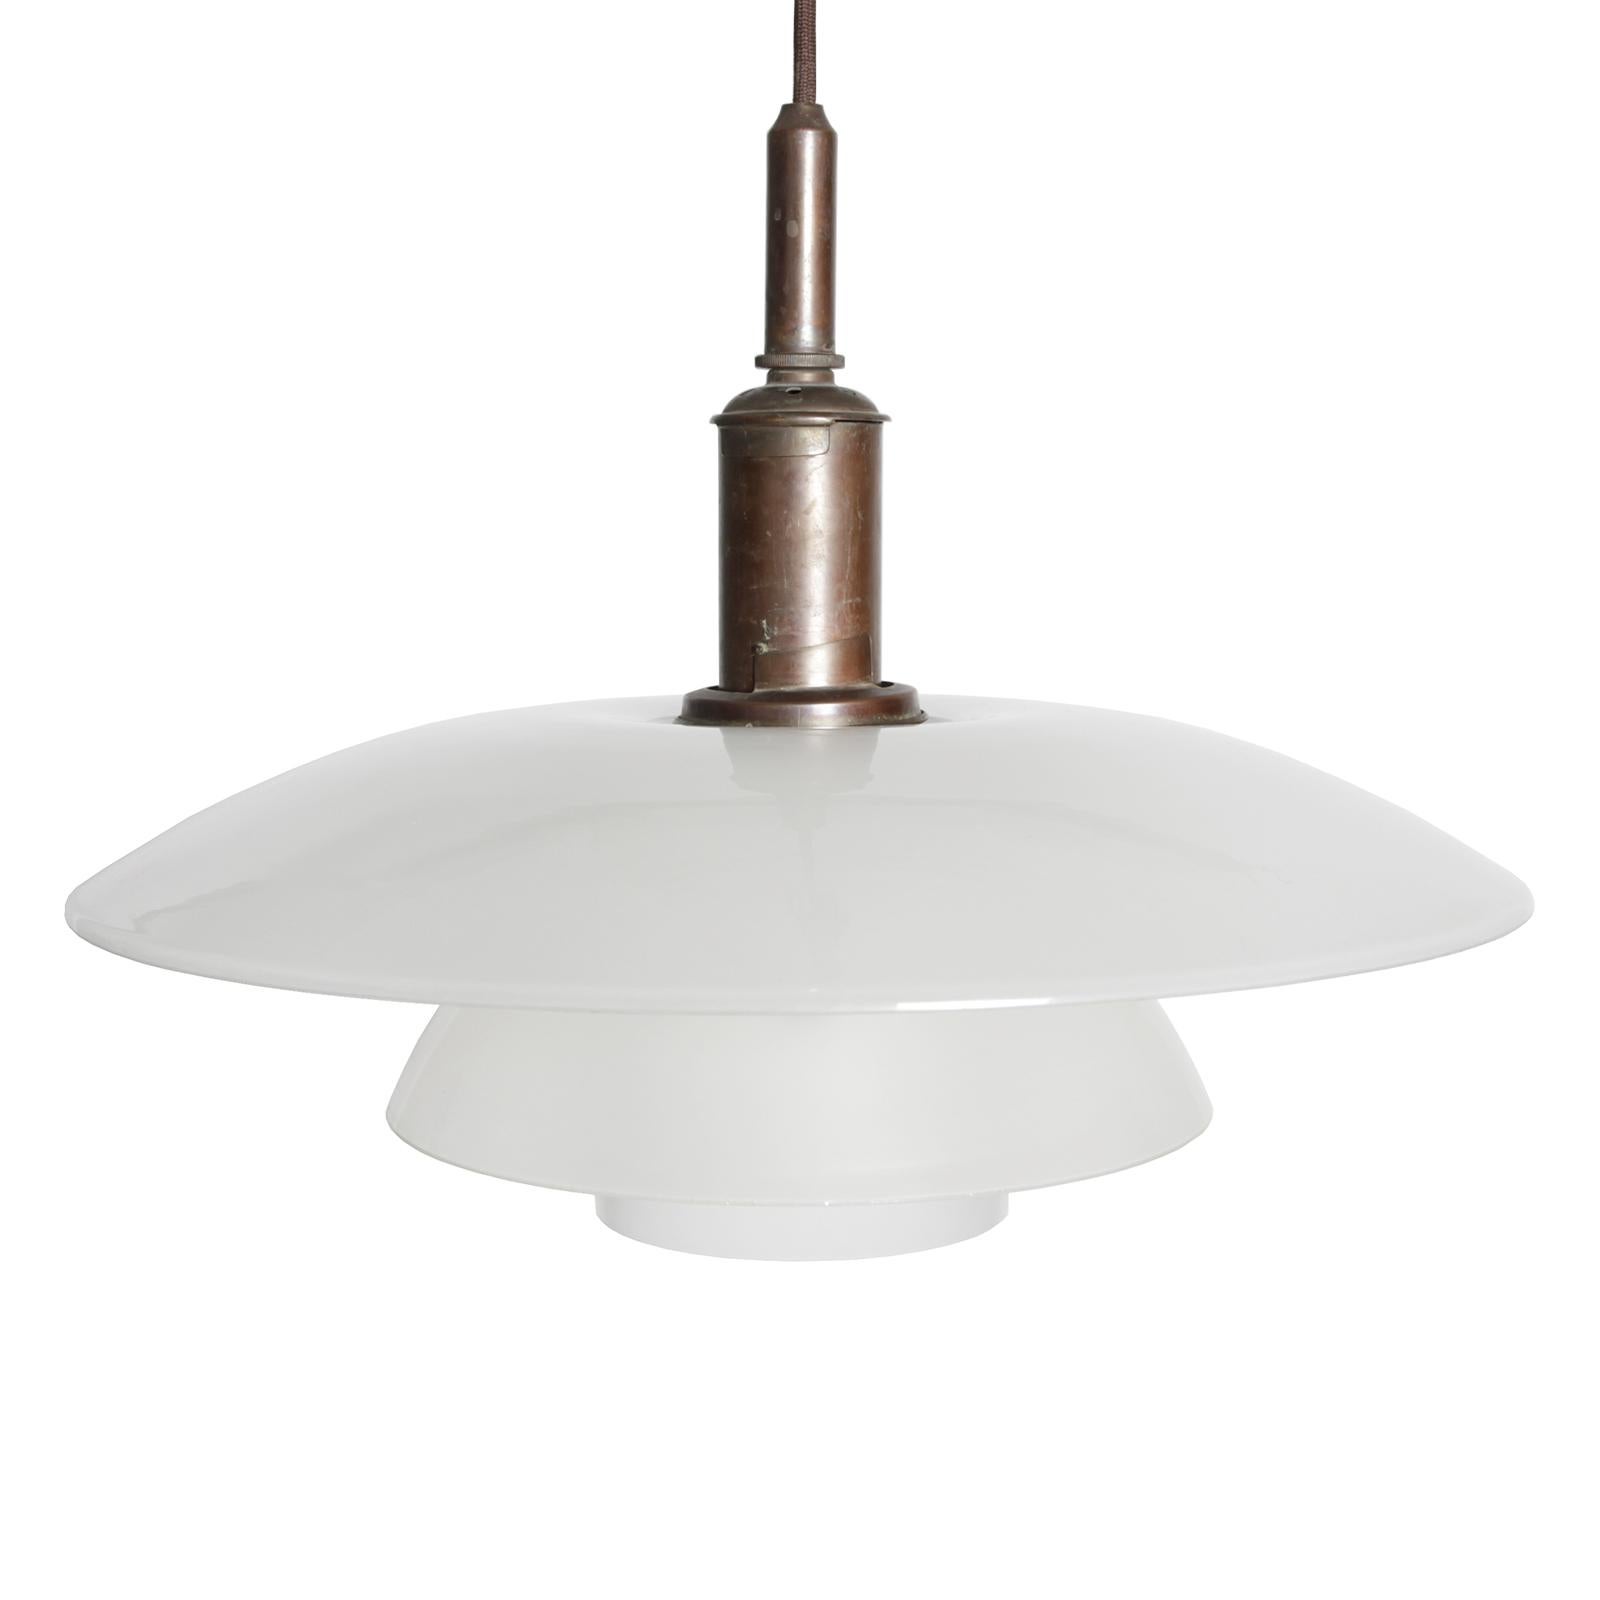 An early PH three-shade pendant with original shades in matte frosted glass with brass fixtures.
Designed by Poul Henningsen in 1927. Made by Louis Poulsen, Denmark.